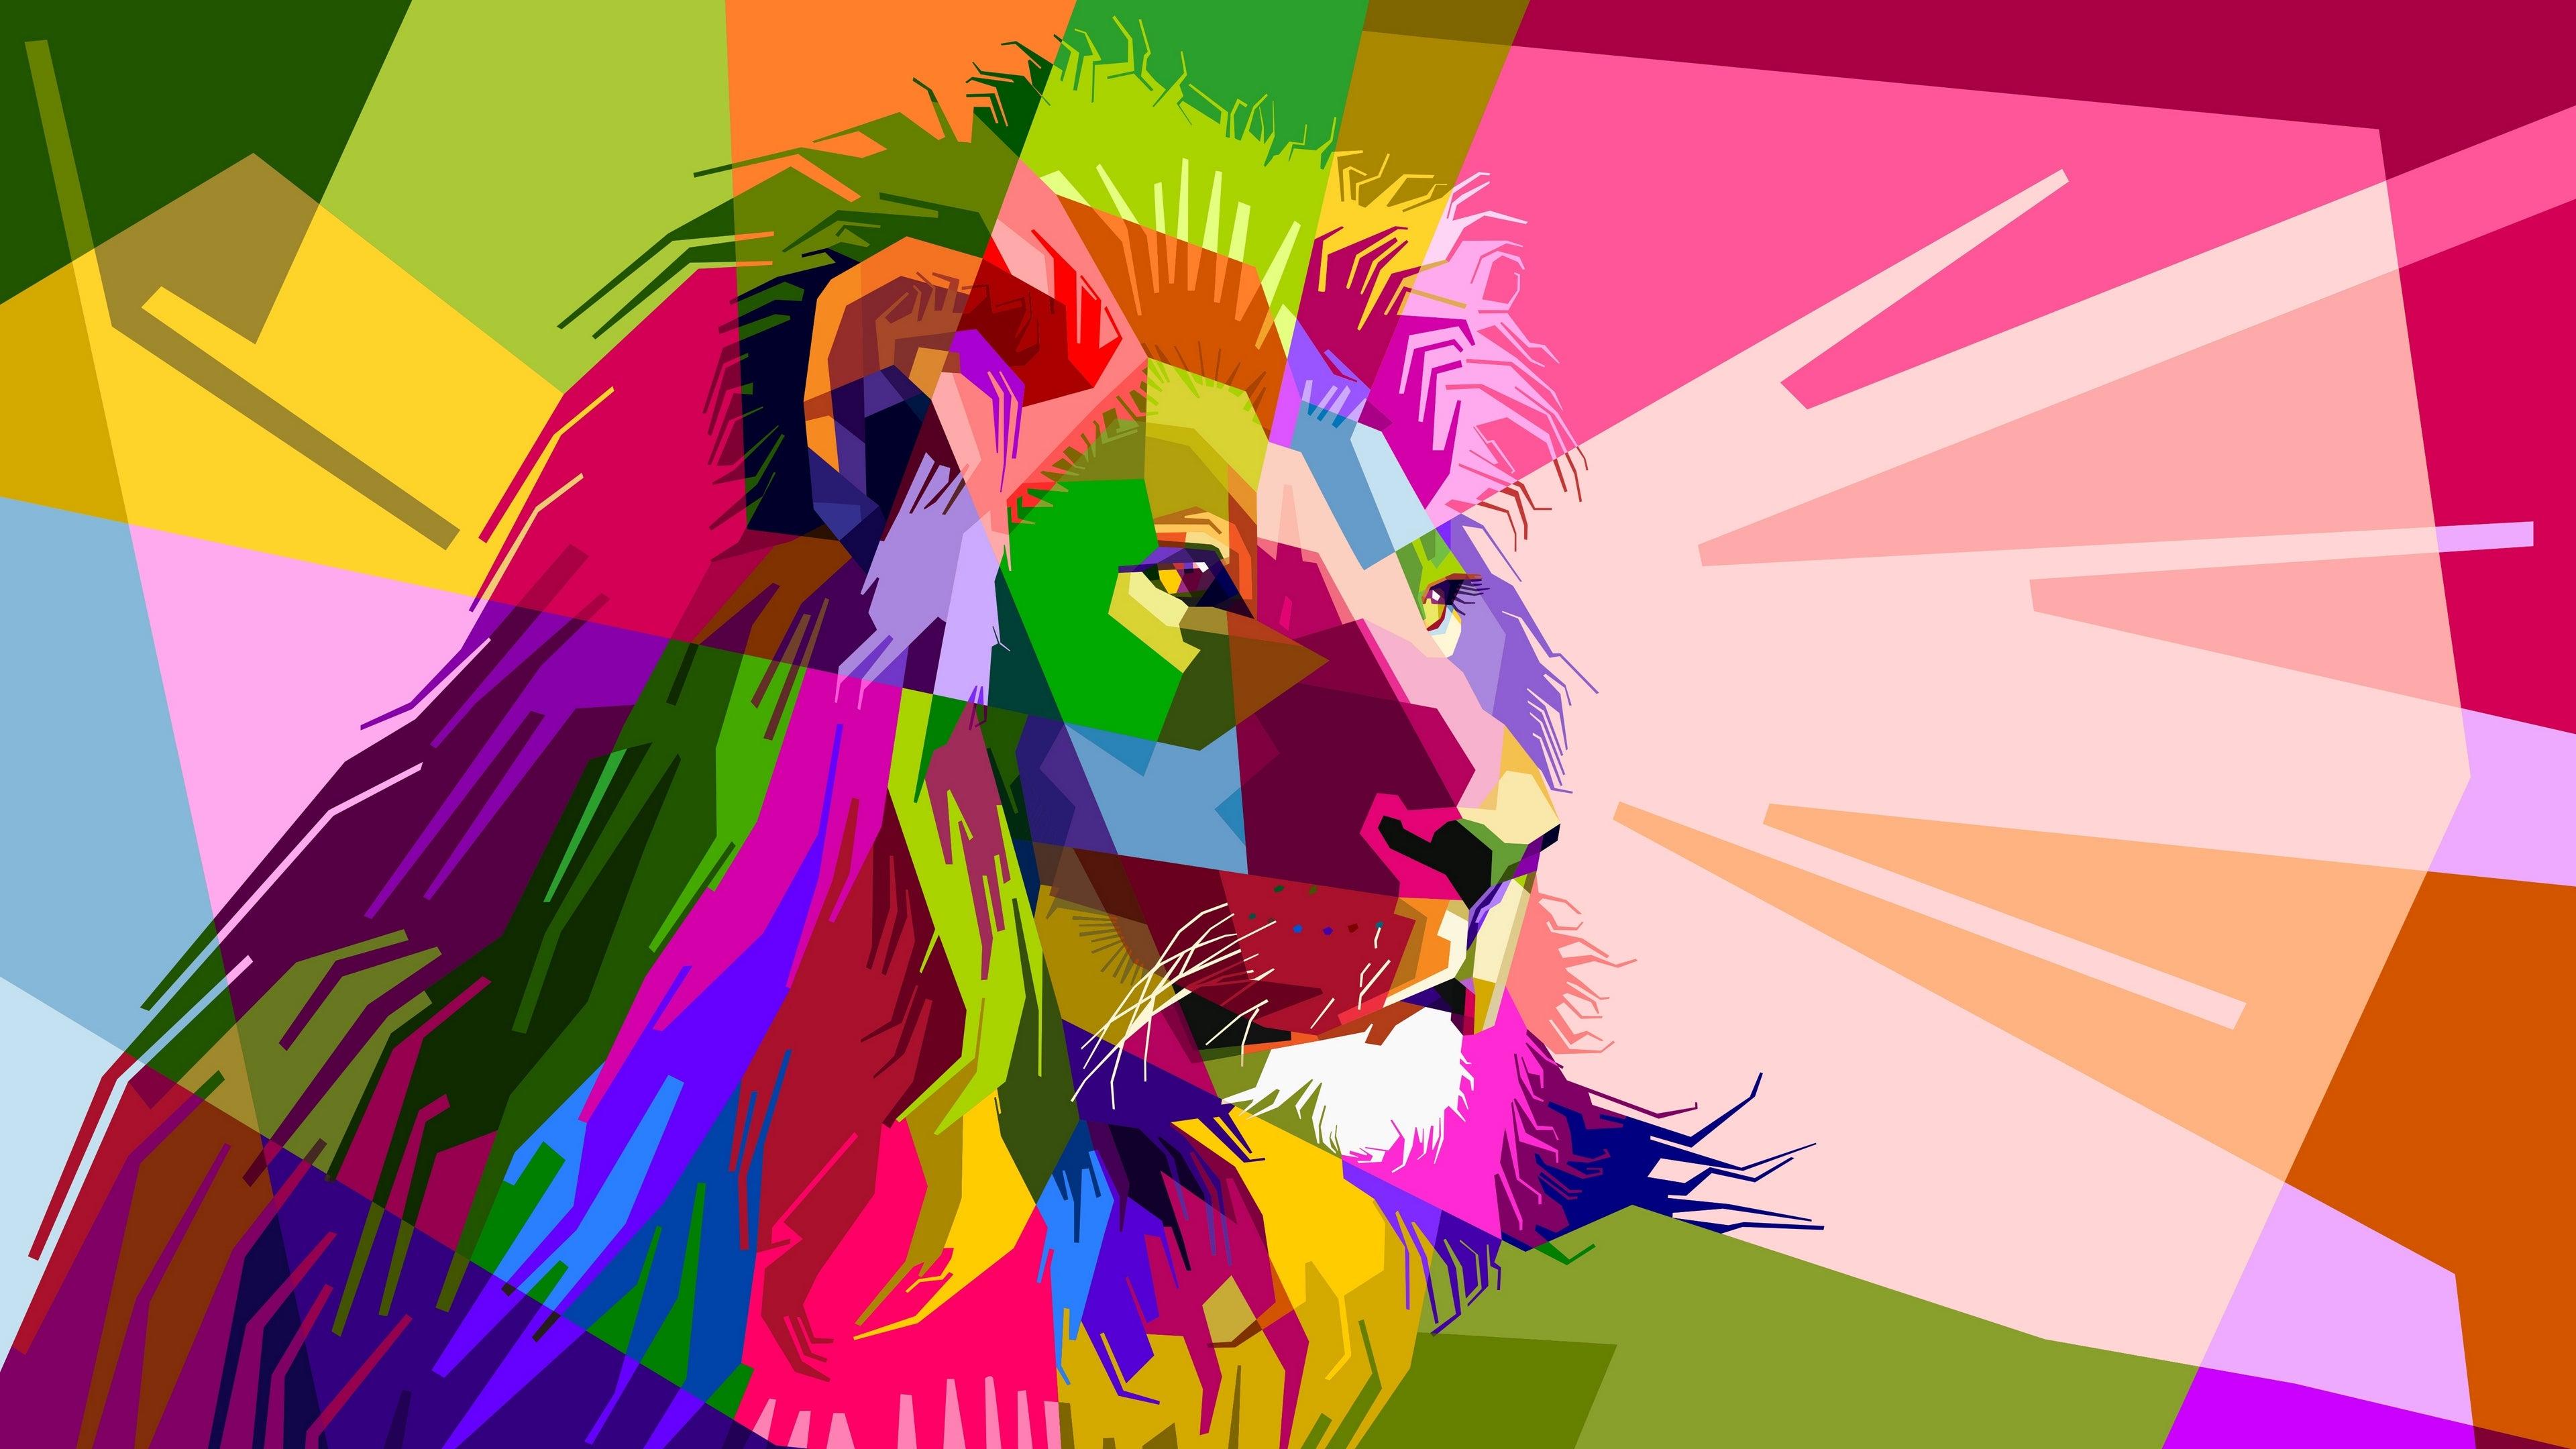 colorful 4K wallpapers for your desktop or mobile screen free and